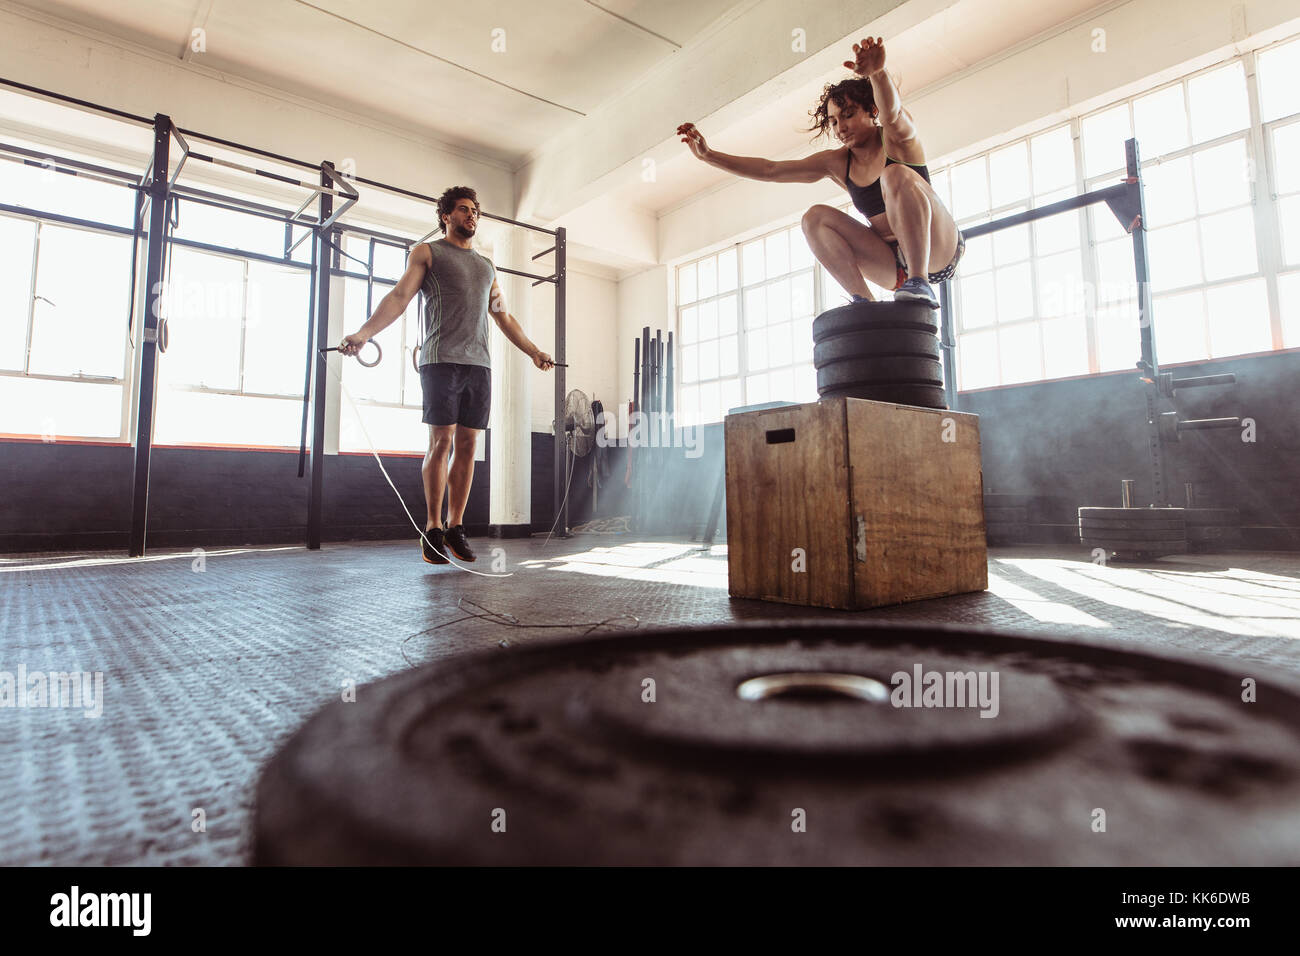 Man exercising using skipping rope and woman jumping on box in gym. Athletic couple training hard at the cross fit gym. Stock Photo